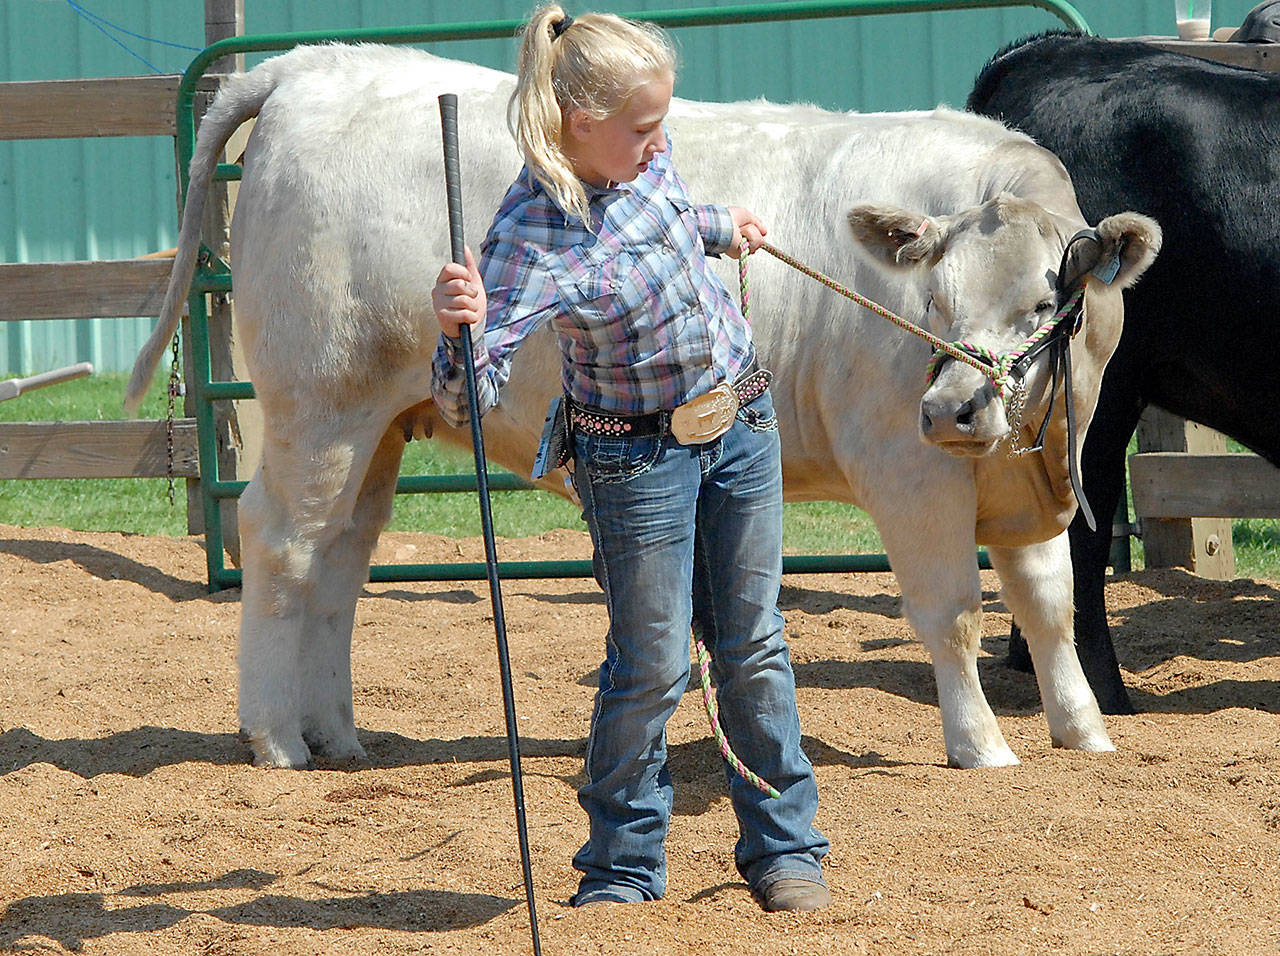 Libby Swanberg, 12, of Port Angeles, a member of the Pure Country 4H Club, stuggles to get Blizzard a club calf, to follow its lead in the cattle ring on Friday at the Clallam County Fair. (Keith Thorpe/Peninsula Daily News)